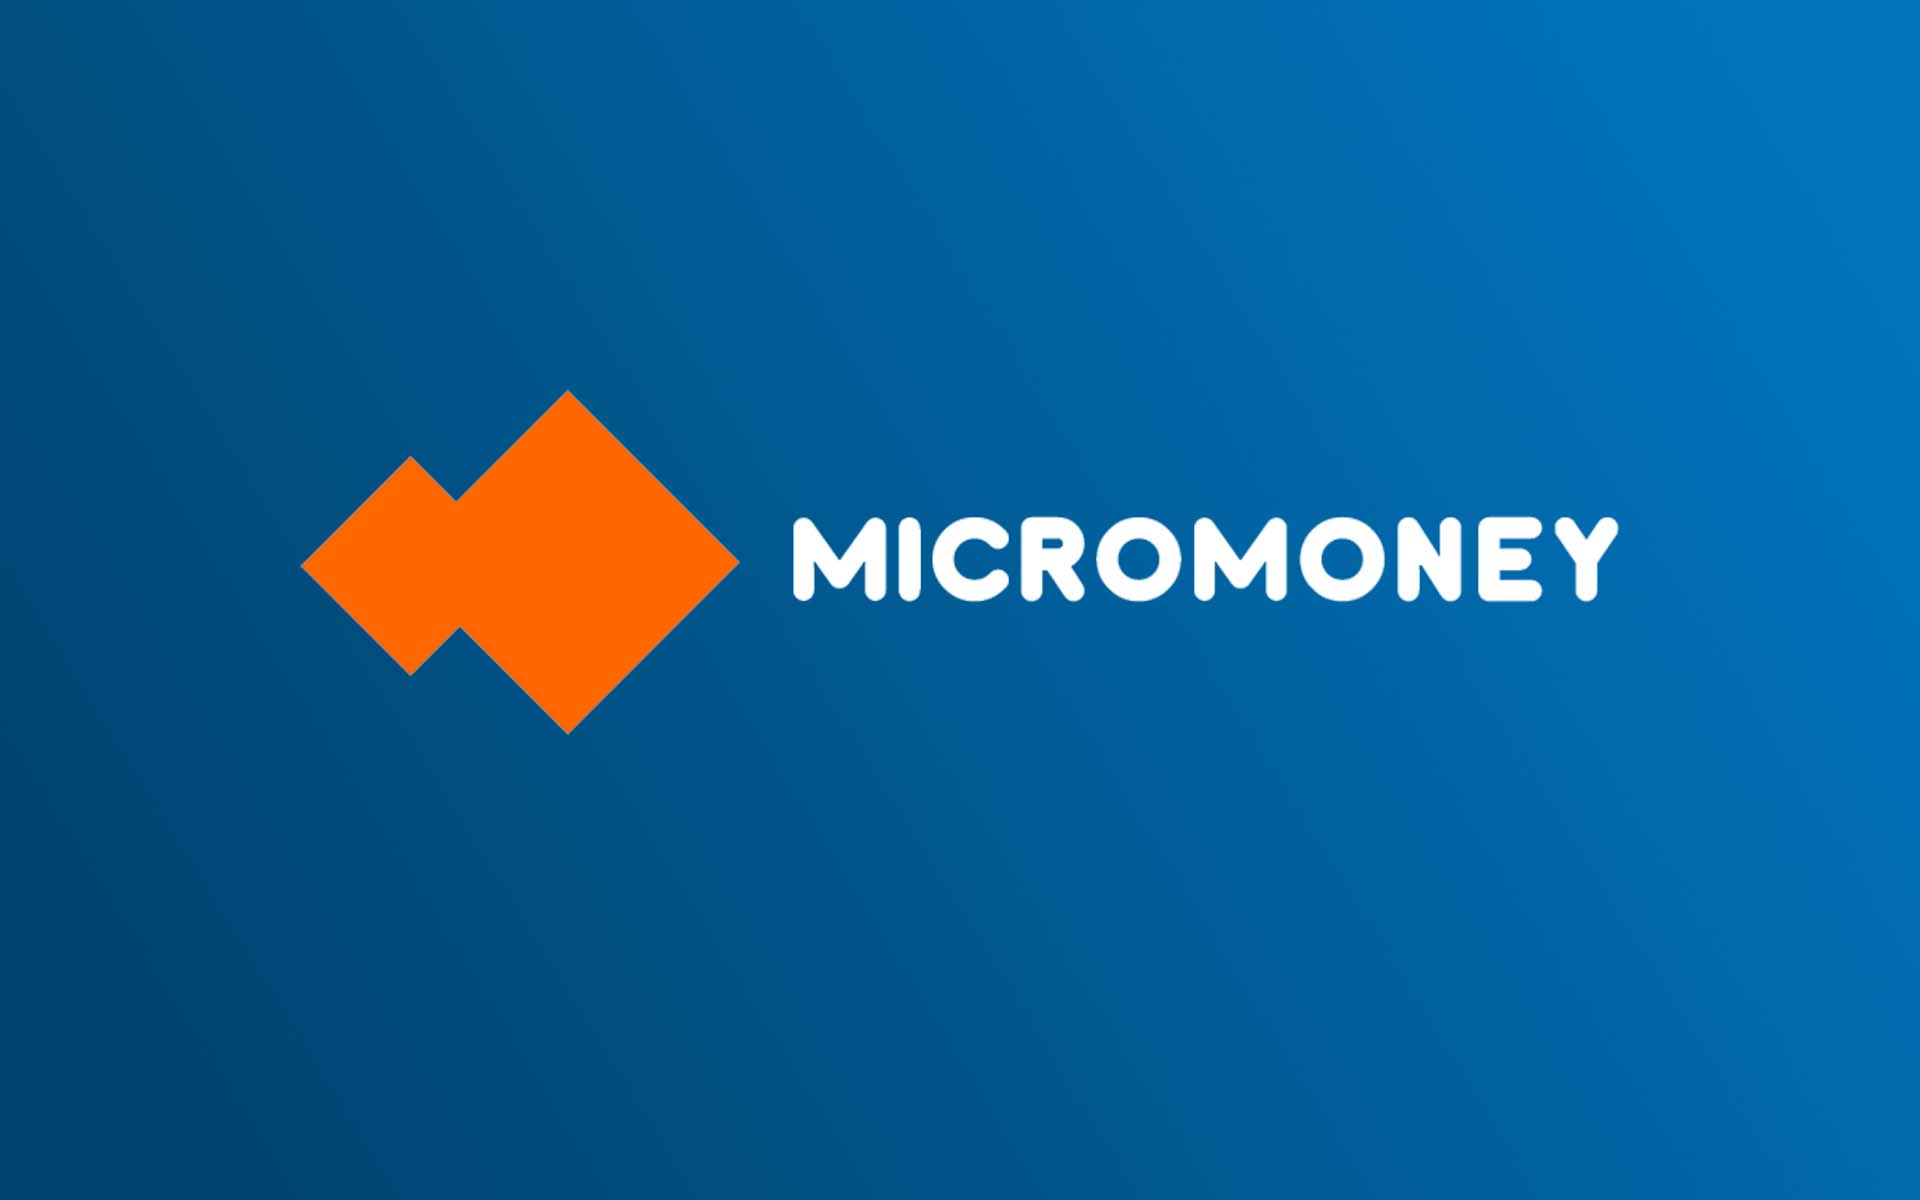 MicroMoney's $30M Token Distribution Campaign Generates $1M in 12 Hours